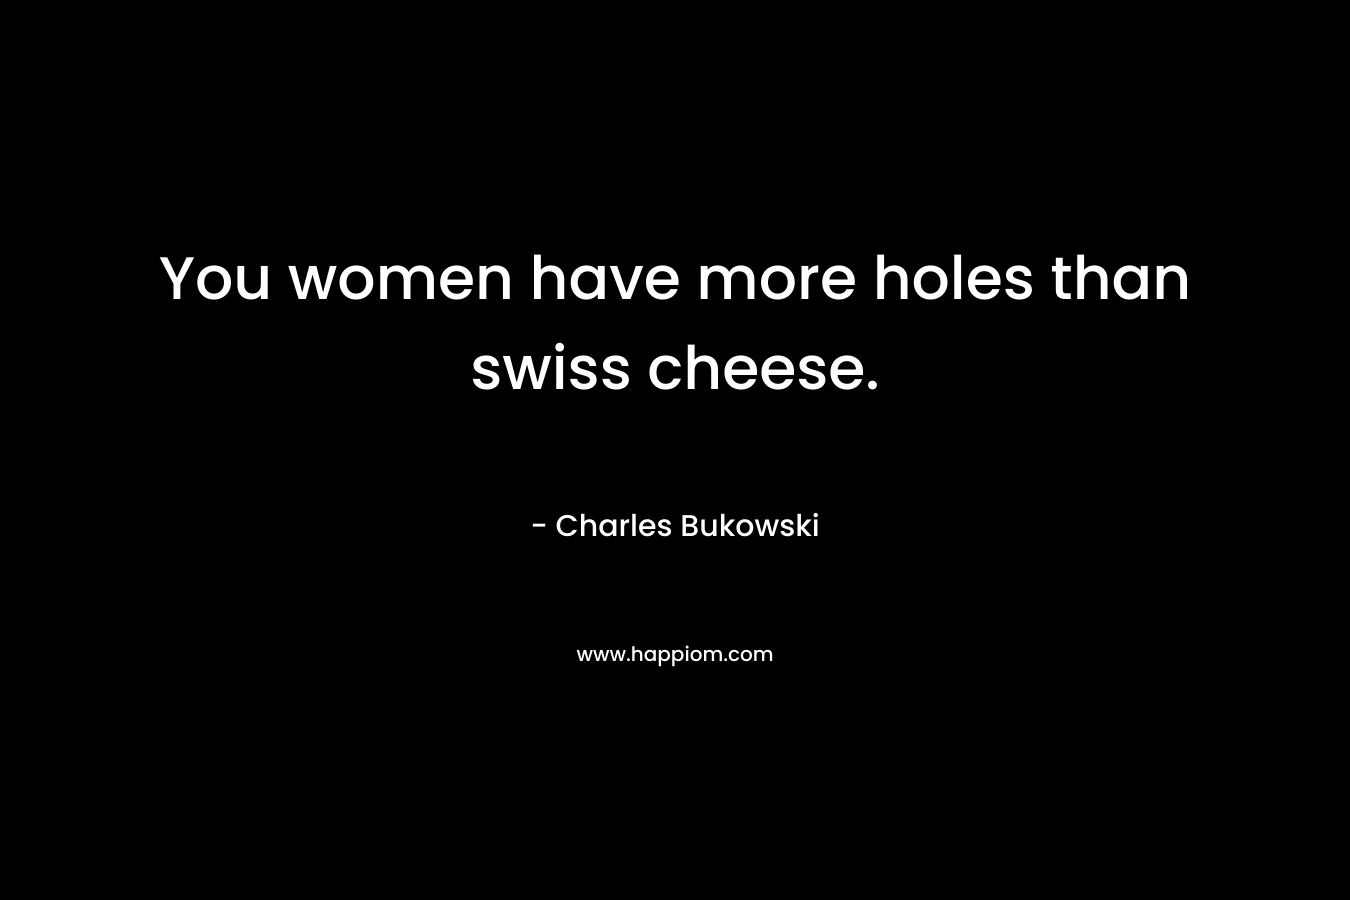 You women have more holes than swiss cheese.